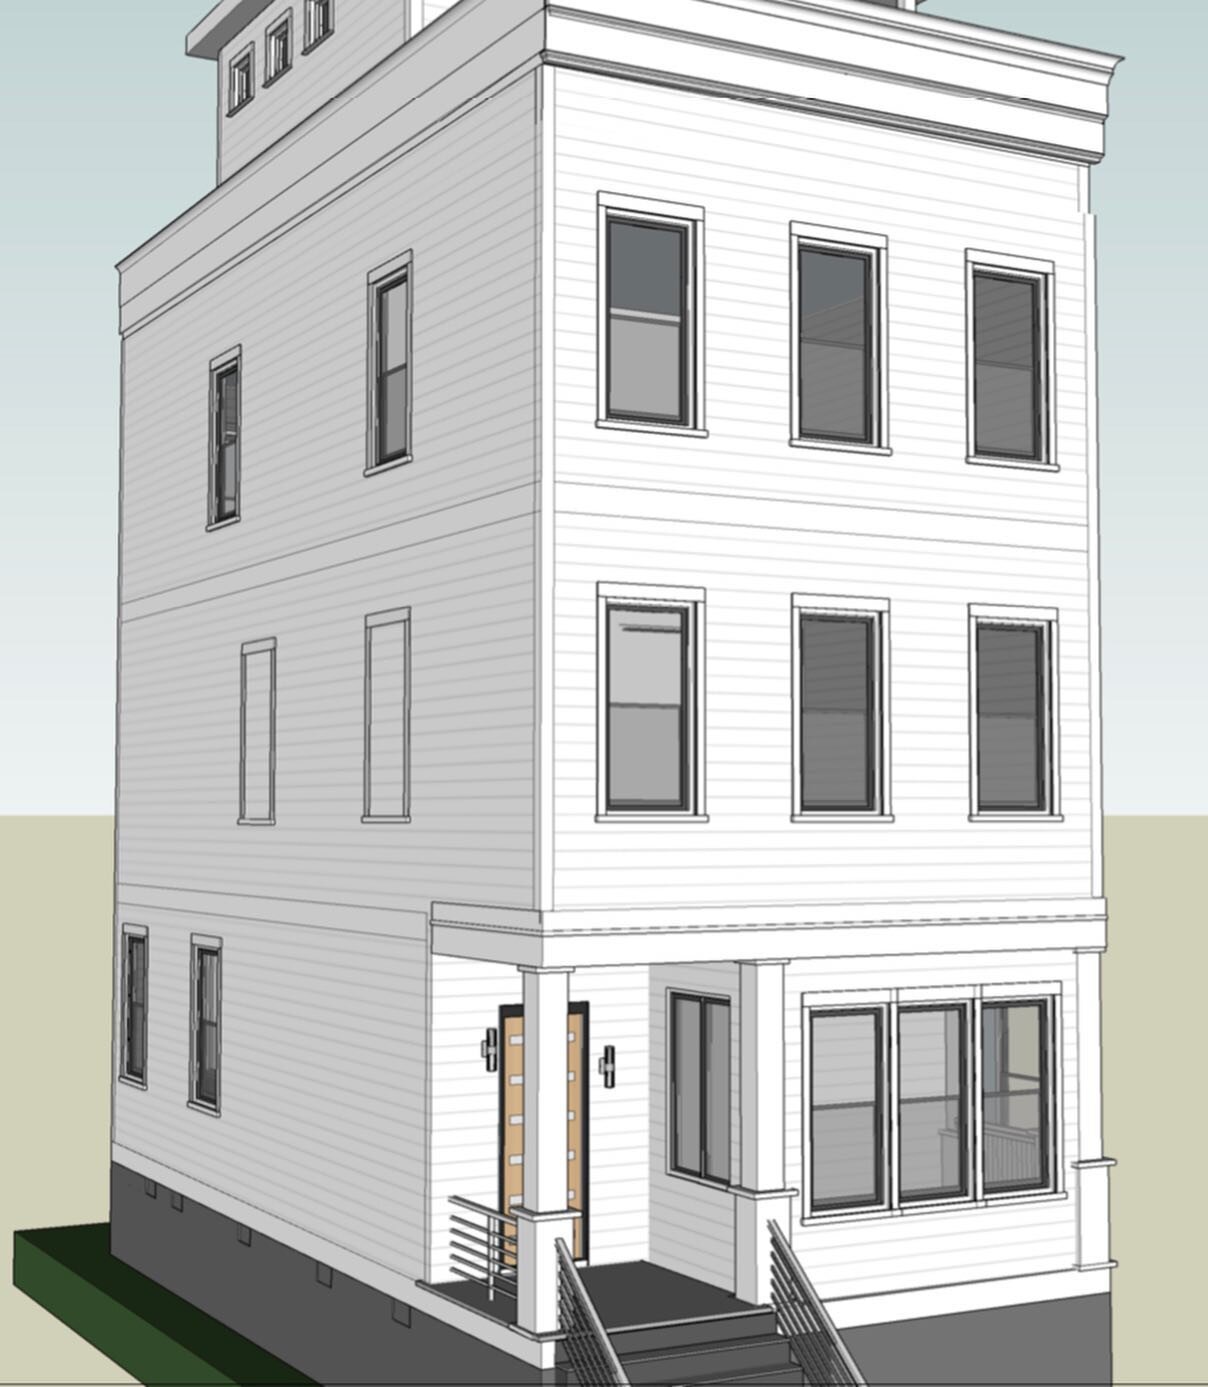 Coming Soon!! Build-to-suit opportunity in Caraleigh Commons&mdash; a downtown Raleigh neighborhood; walkable to Dix Park, the Warehouse District and the upcoming Park City. This modern home will have a rooftop deck with gorgeous skyline &amp; nature